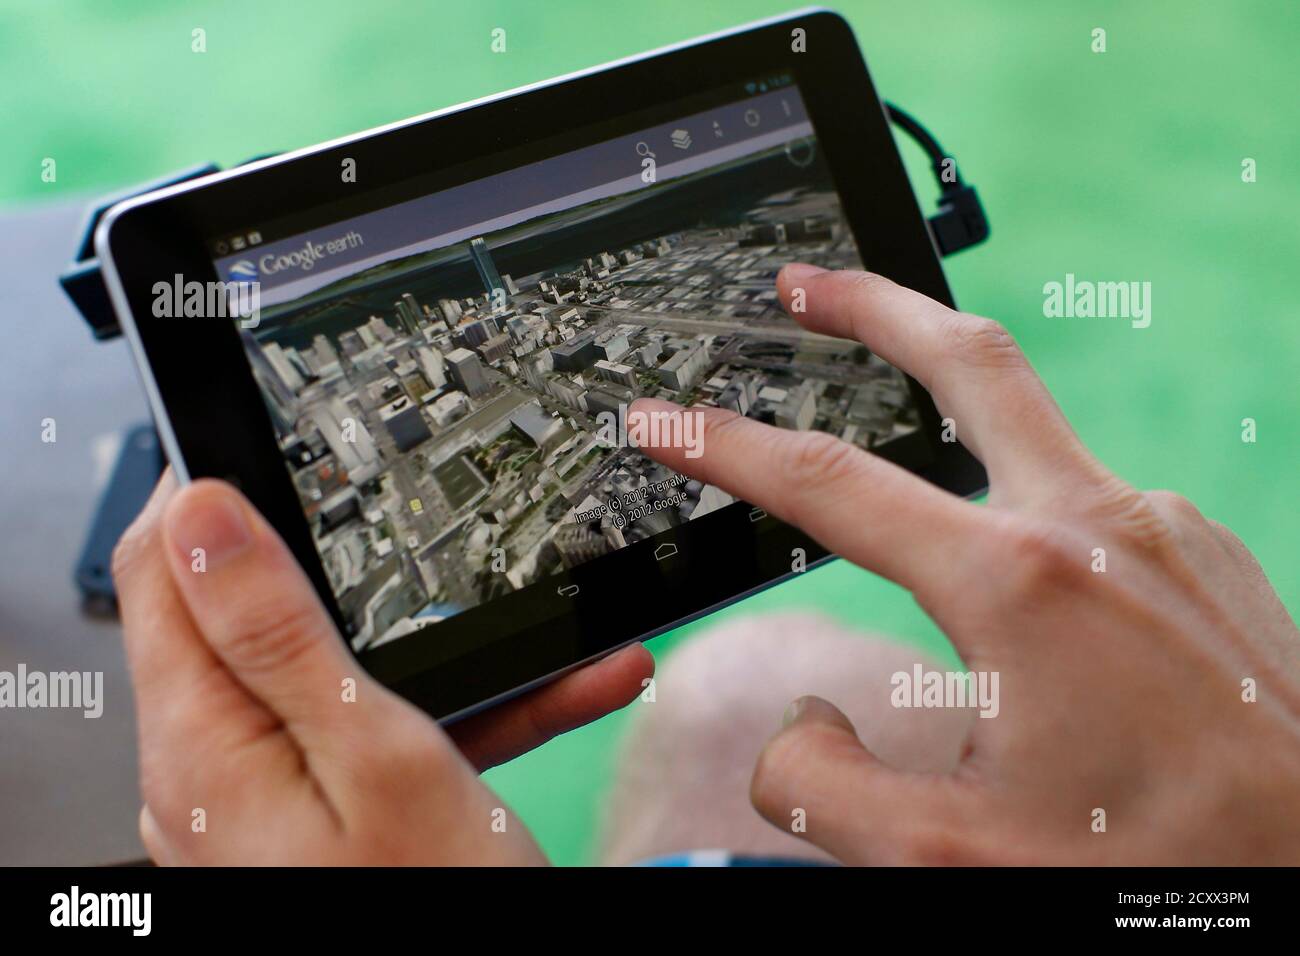 An attendee uses Google Map on a Google Nexus 7 tablet during Google I/O  2012 Conference at Moscone Center in San Francisco, California June 27,  2012. Google Inc unveiled its first tablet